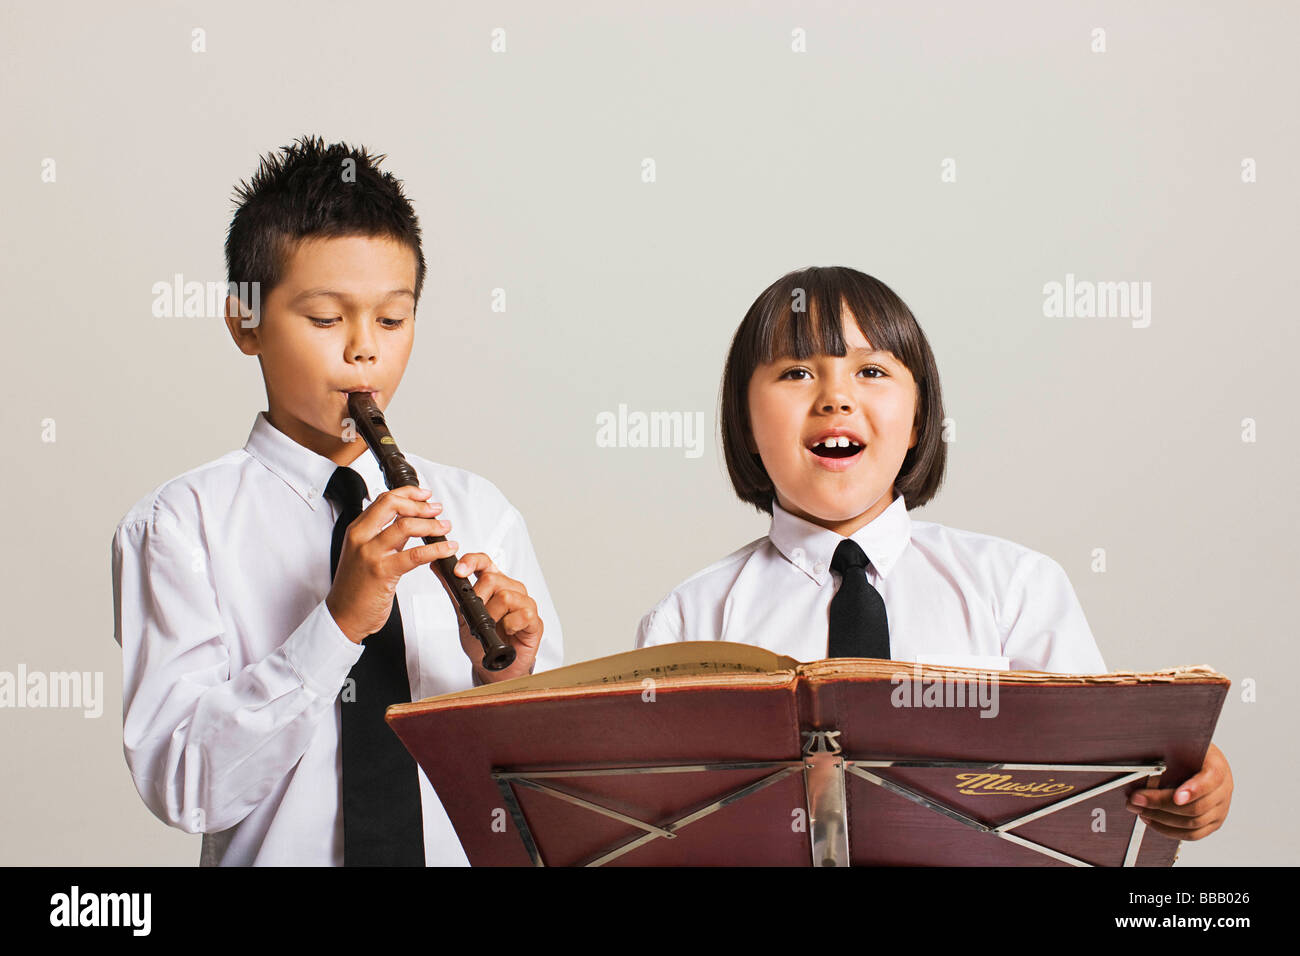 Kids Playing Musical Instruments Stock Photo Alamy